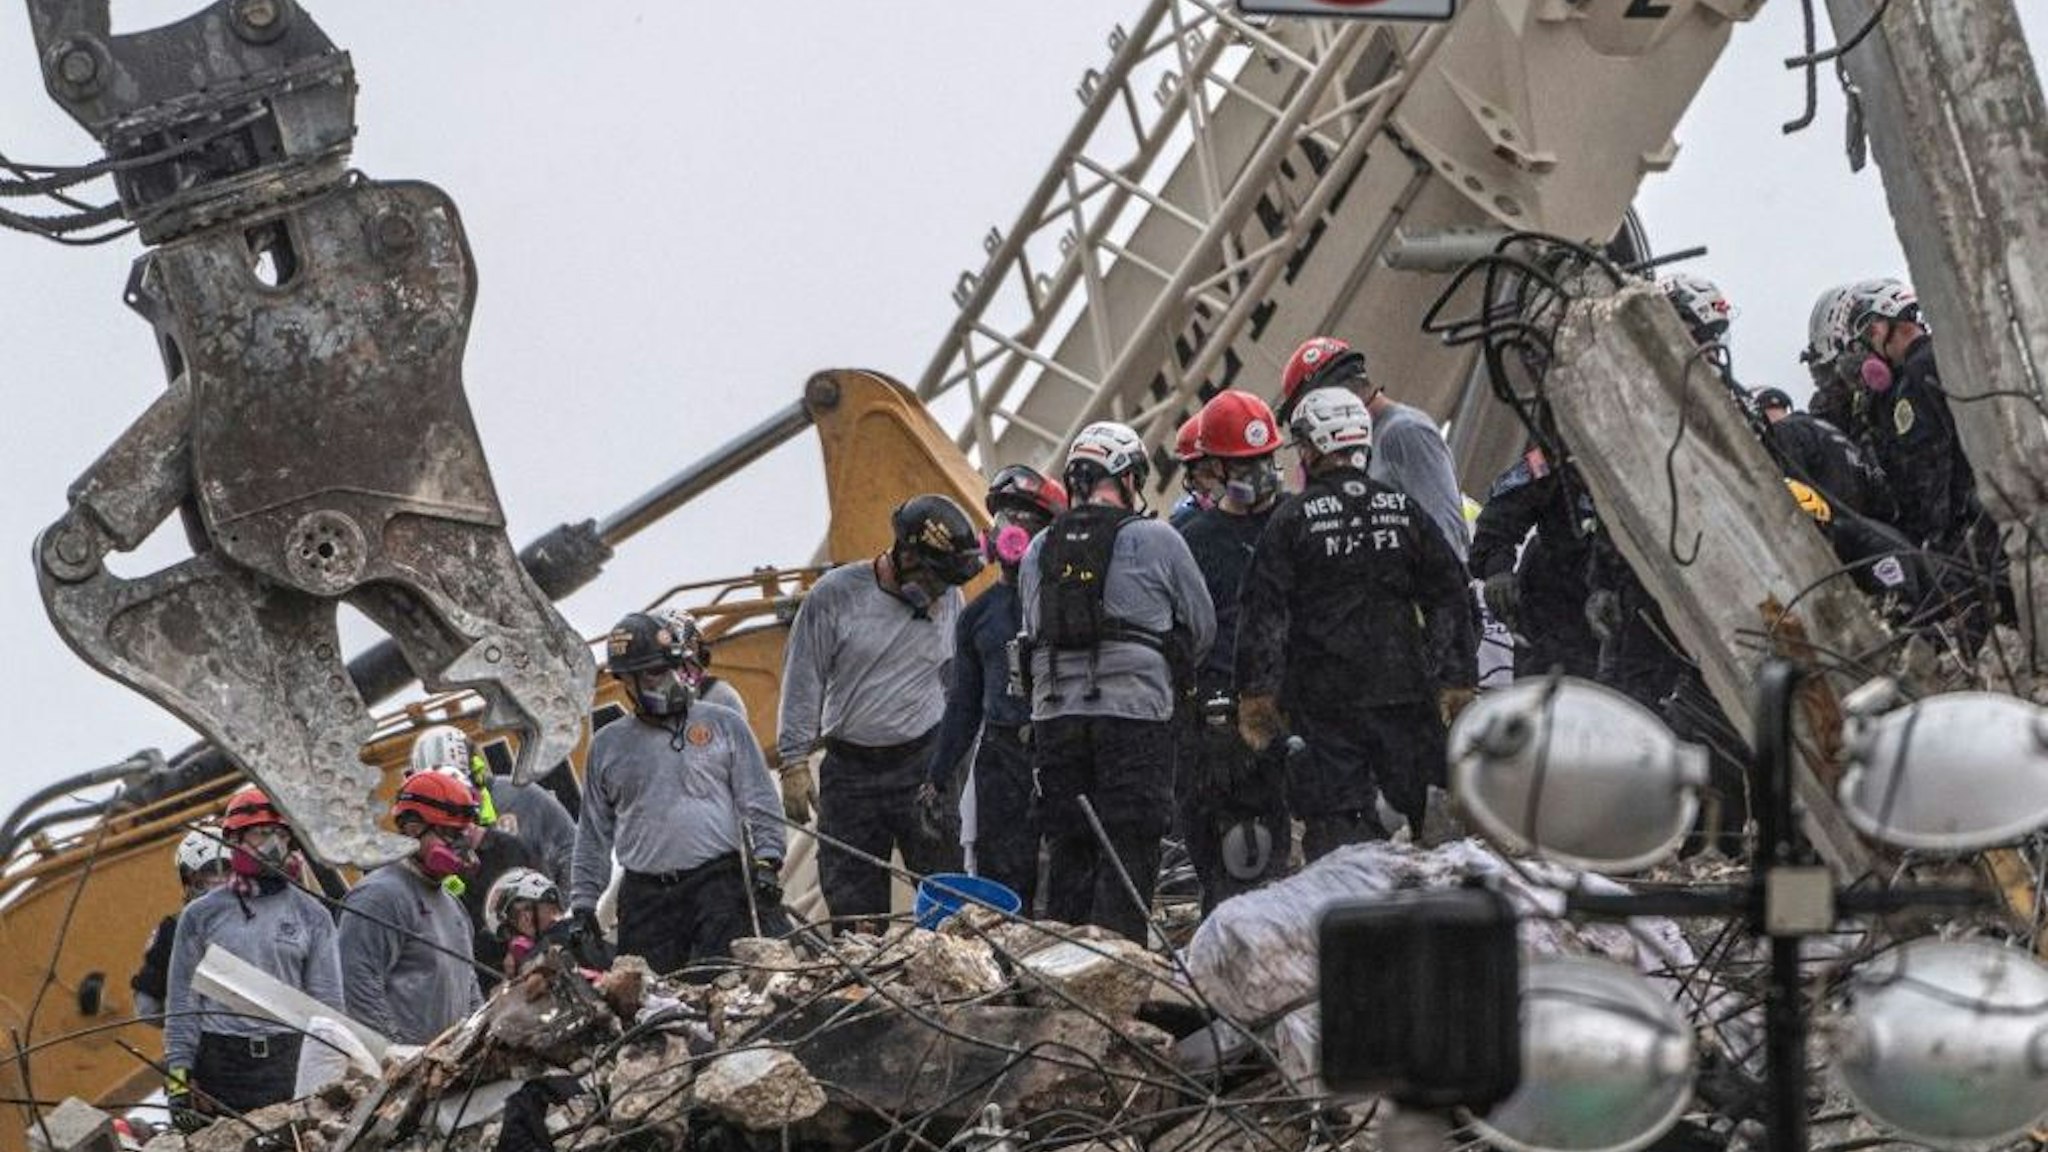 After a brief stop to demolish the standing debris, search and rescue personnel continue to work in the rain on the rubble pile of the 12-story Champlain Towers South condo that partially collapsed on July 5, 2021 in Surfside, Florida. - A controlled explosion brought down the unstable remains of the collapsed apartment block in Florida late on July 4 ahead of a threatening tropical storm as rescuers prepare to resume searching for victims.